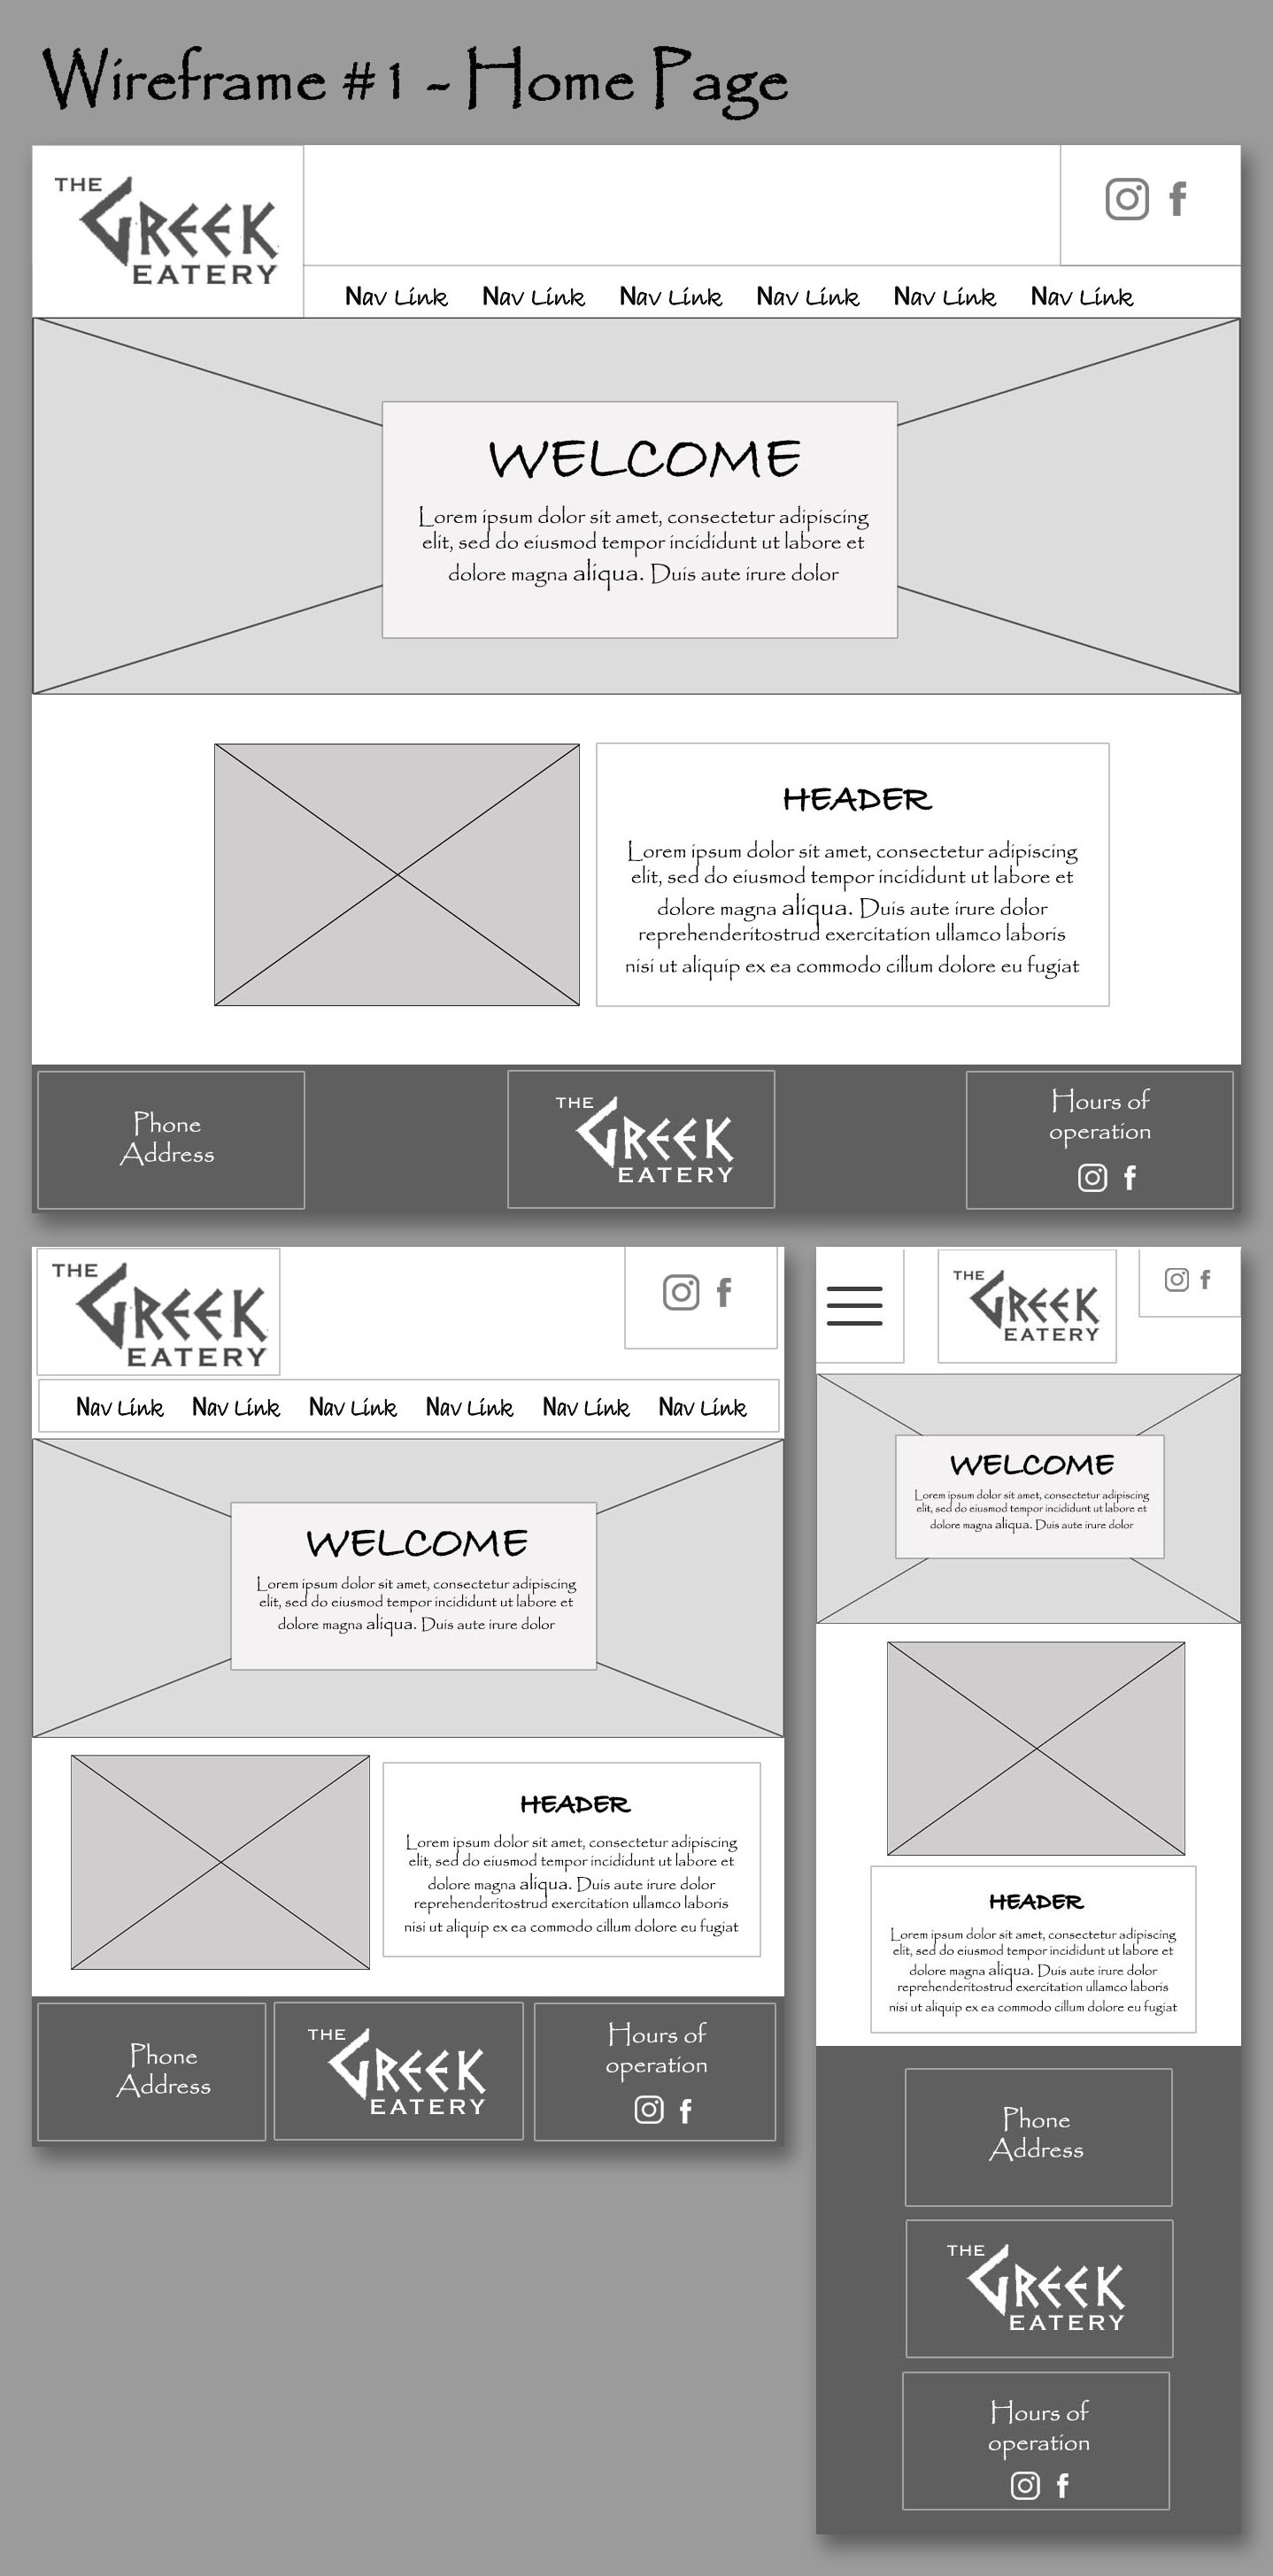 Wireframe #1 - Home Page